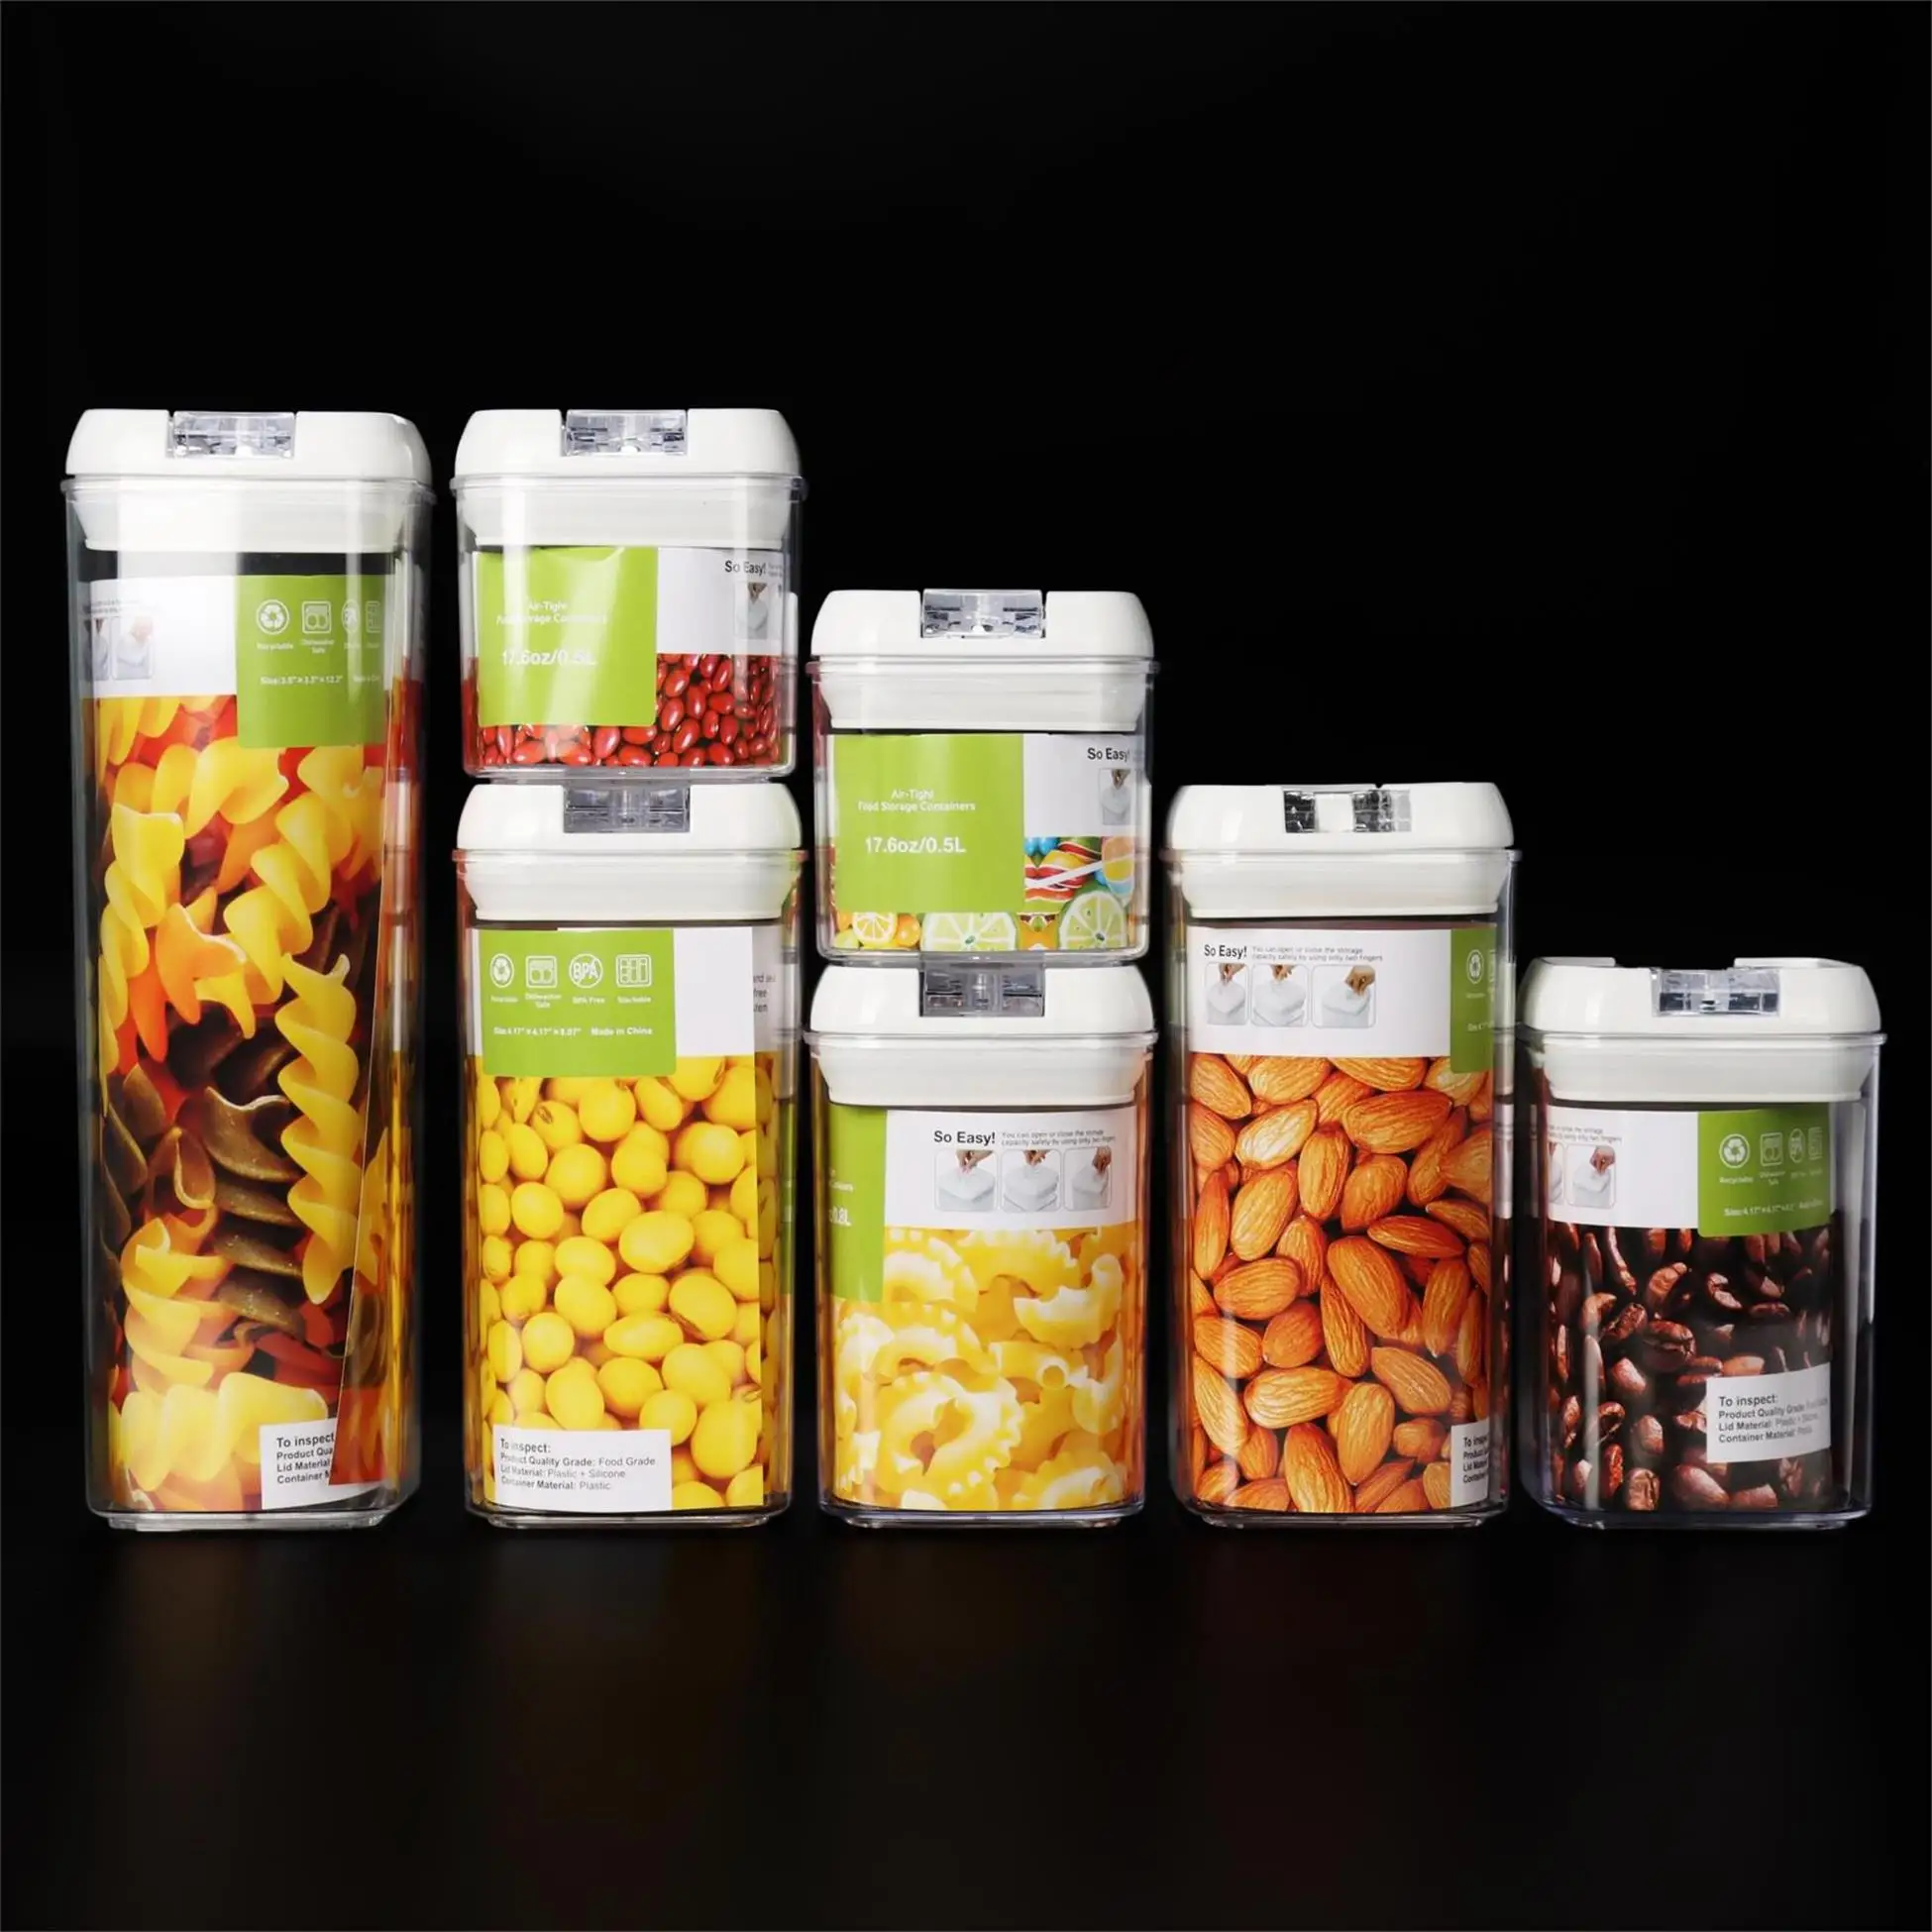 

7pcs Set Airtight Storage Tank Food Storage Containers Plastic Cereal Containers With Airtight Lids Kitchen Pantry Organizer